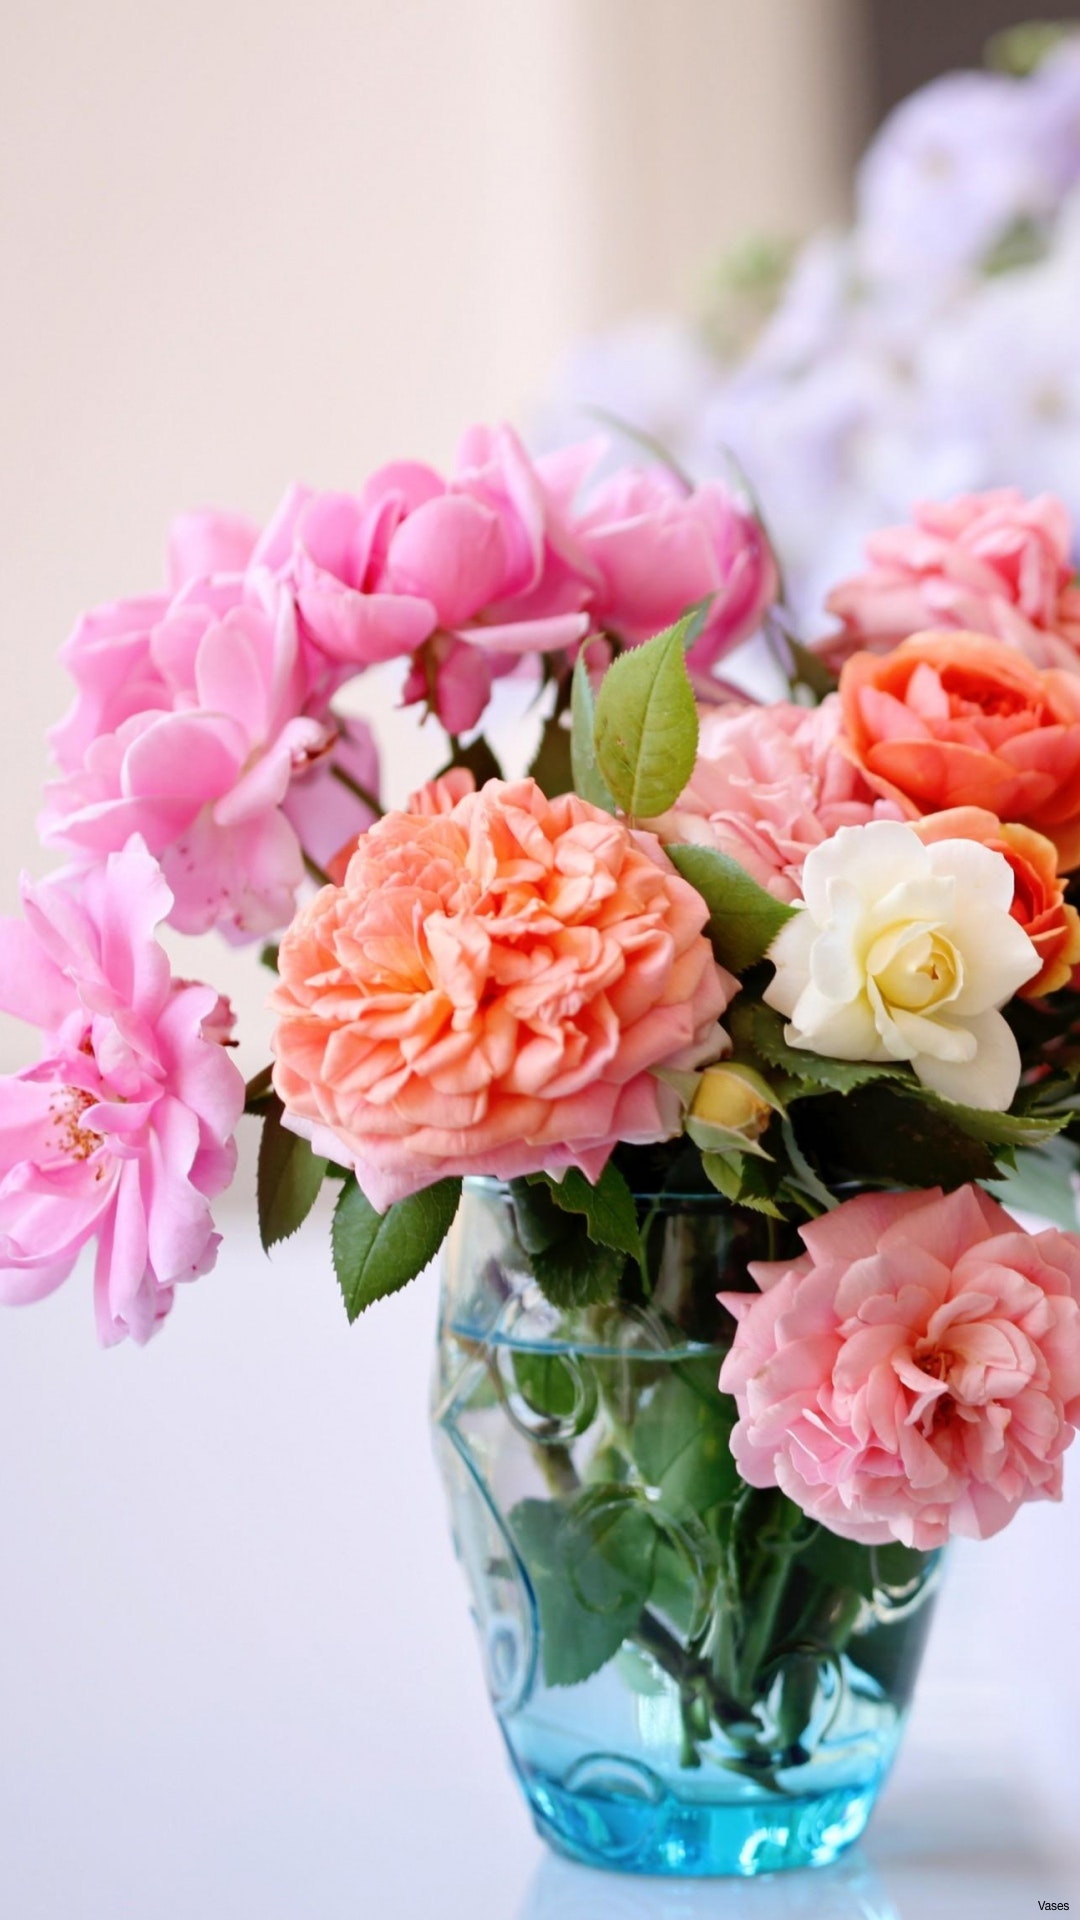 vases-how-to-take-care-of-roses-in-a-vase-beautiful-flower-wallpapers-for-you-fl.jpg